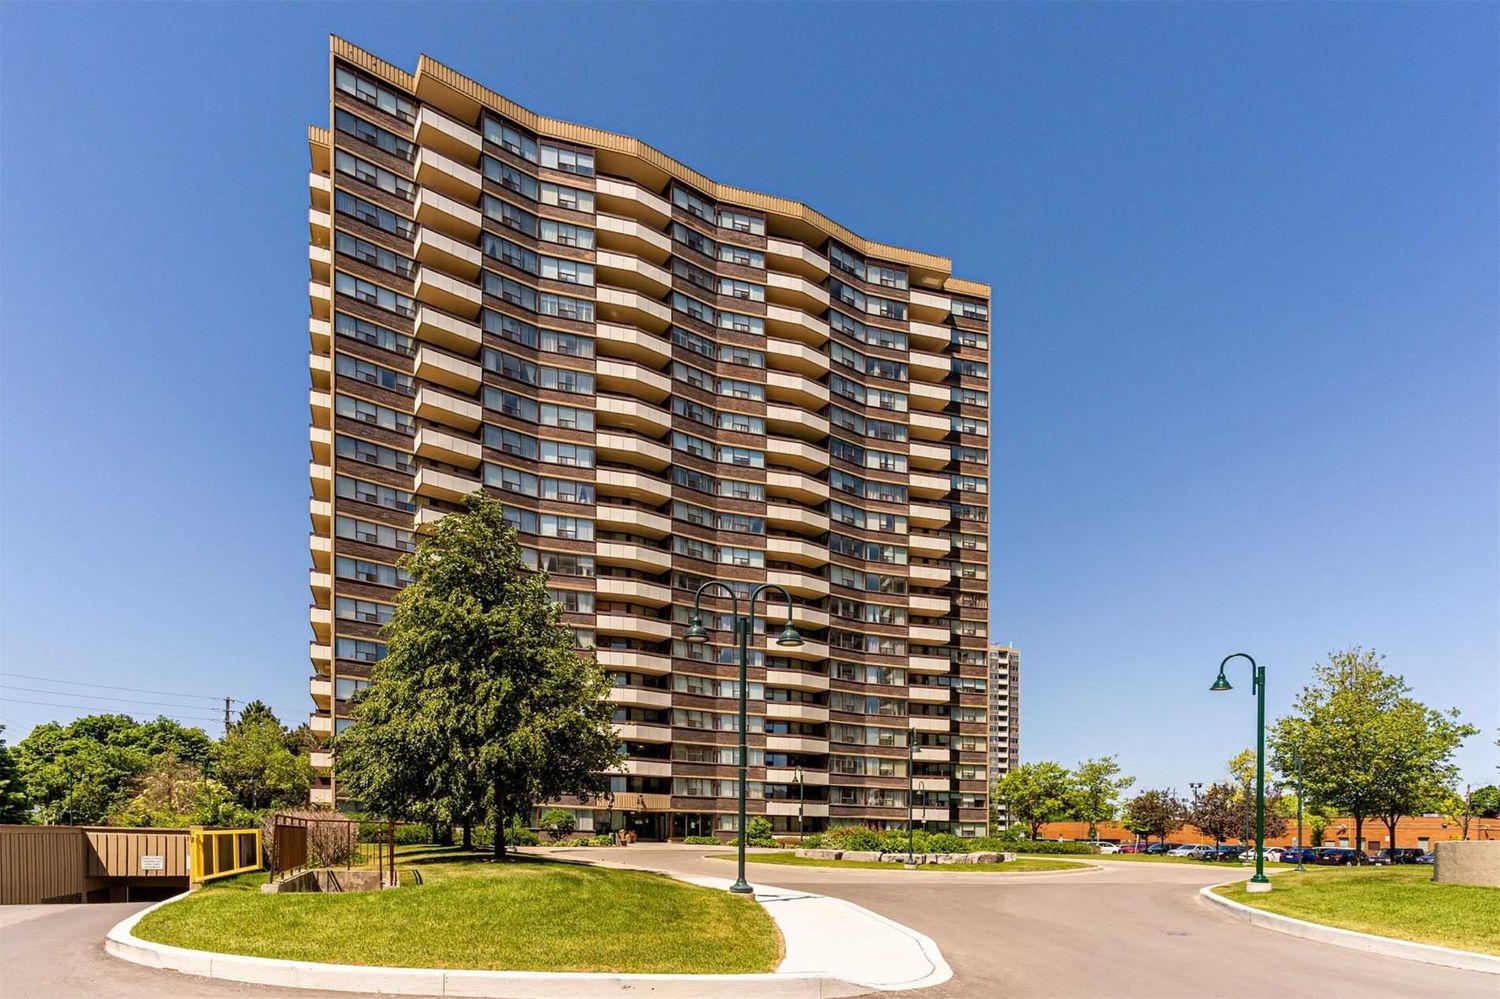 45-65 Huntingdale Boulevard. Royal Crest III Condos is located in  Scarborough, Toronto - image #2 of 2